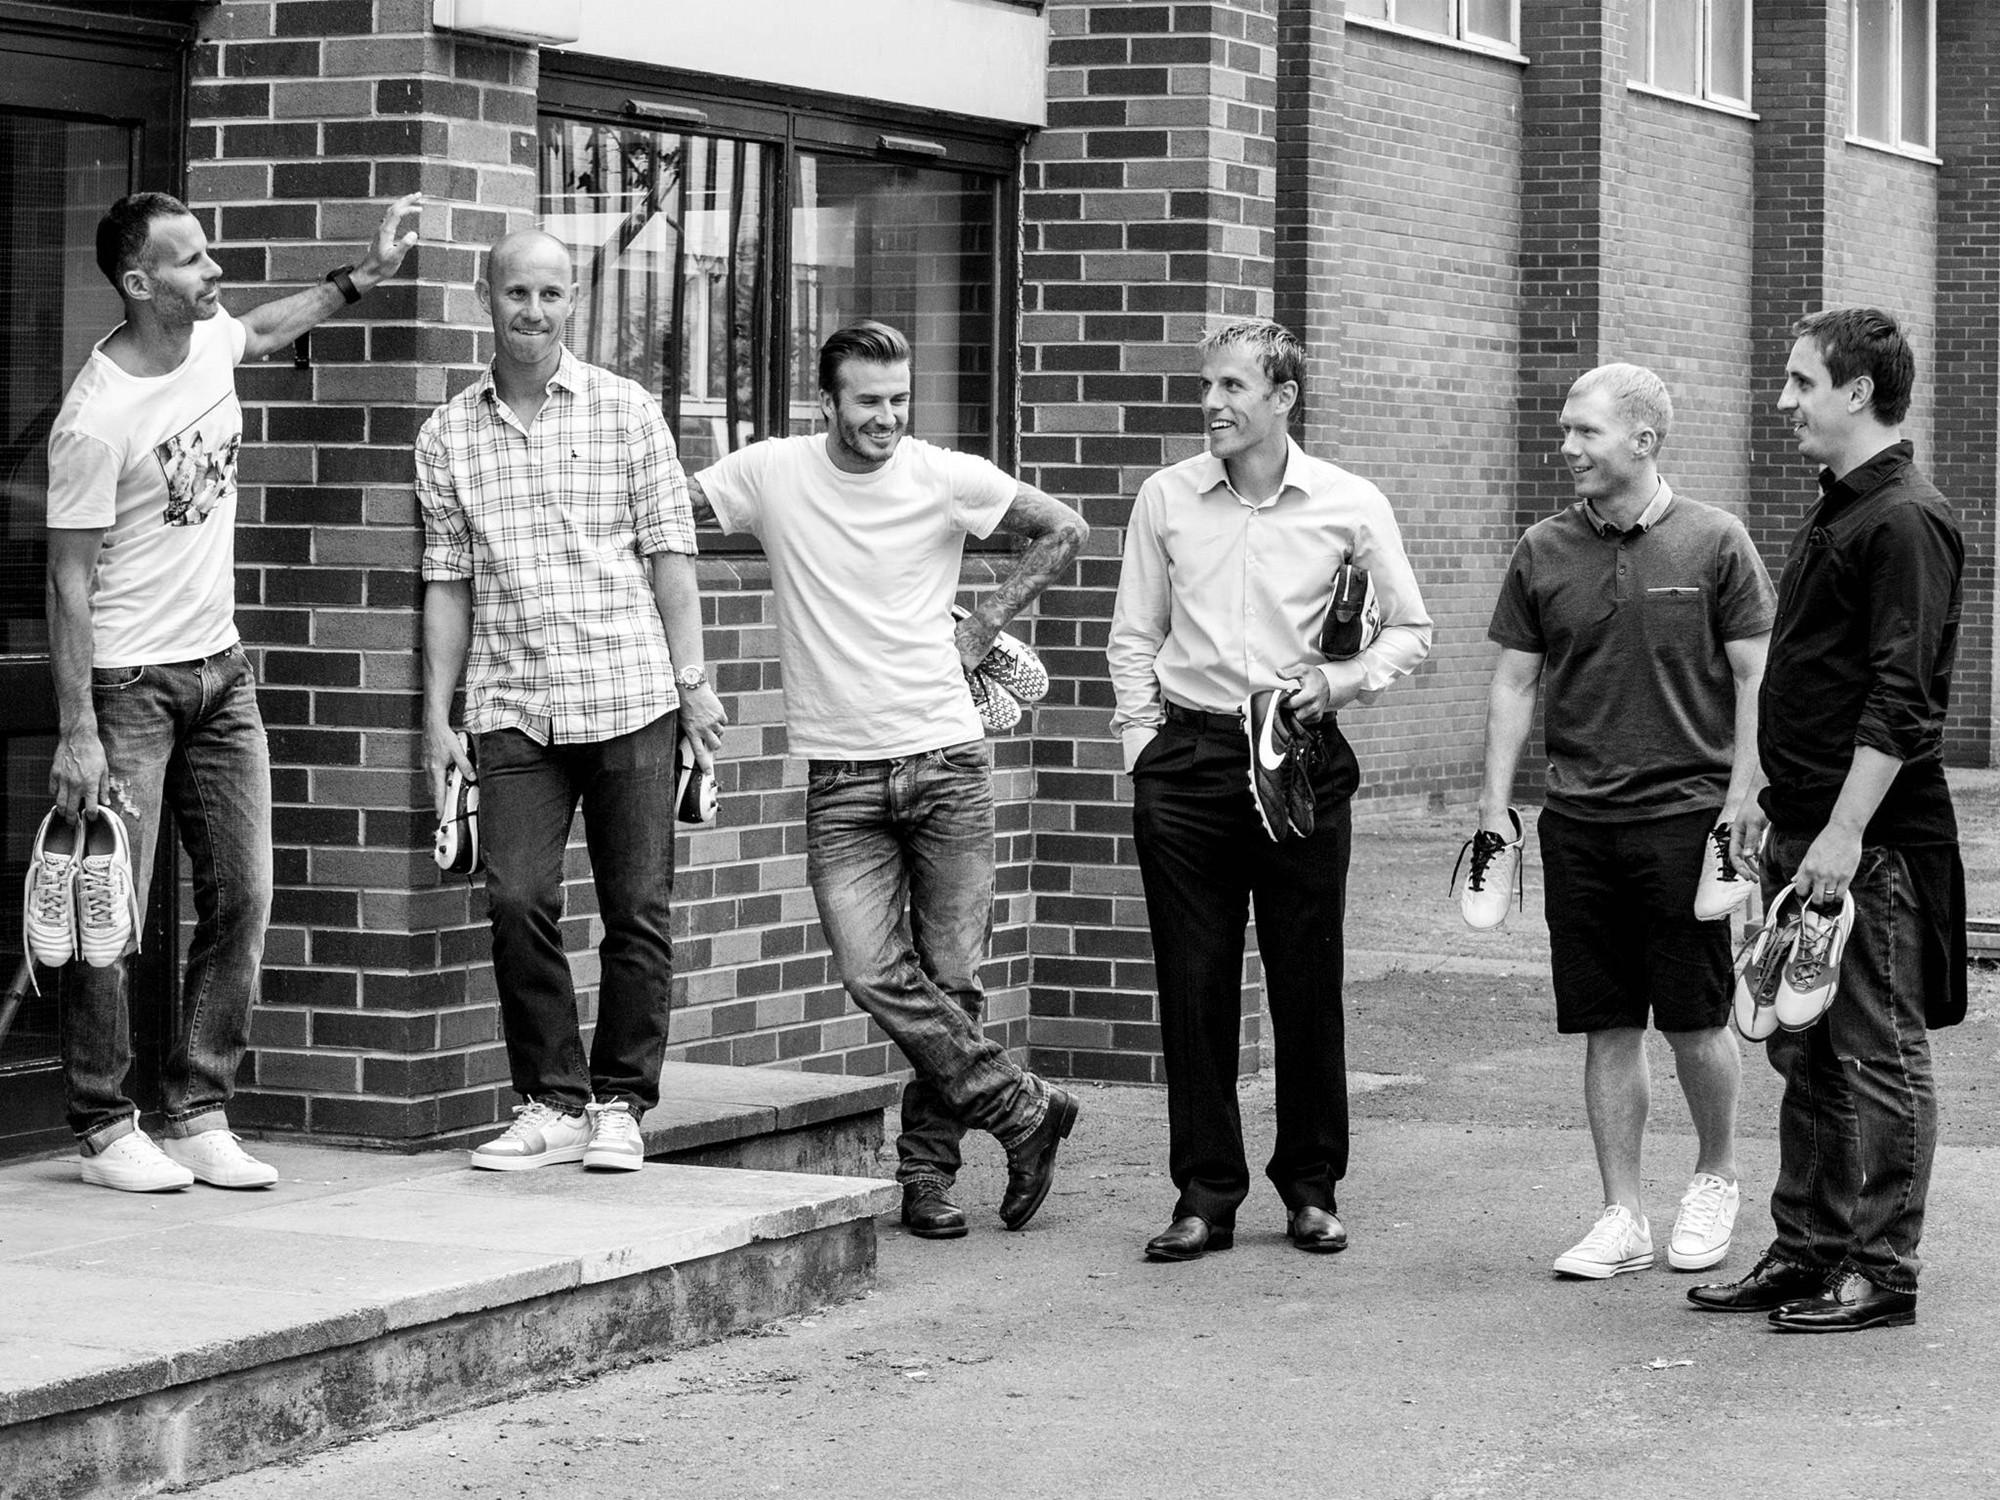 Ryan Giggs, Nicky Butt, David Beckham, Phil Neville, Paul Scholes and Gary Neville in Universal Pictures' The Class of 92 (2013)